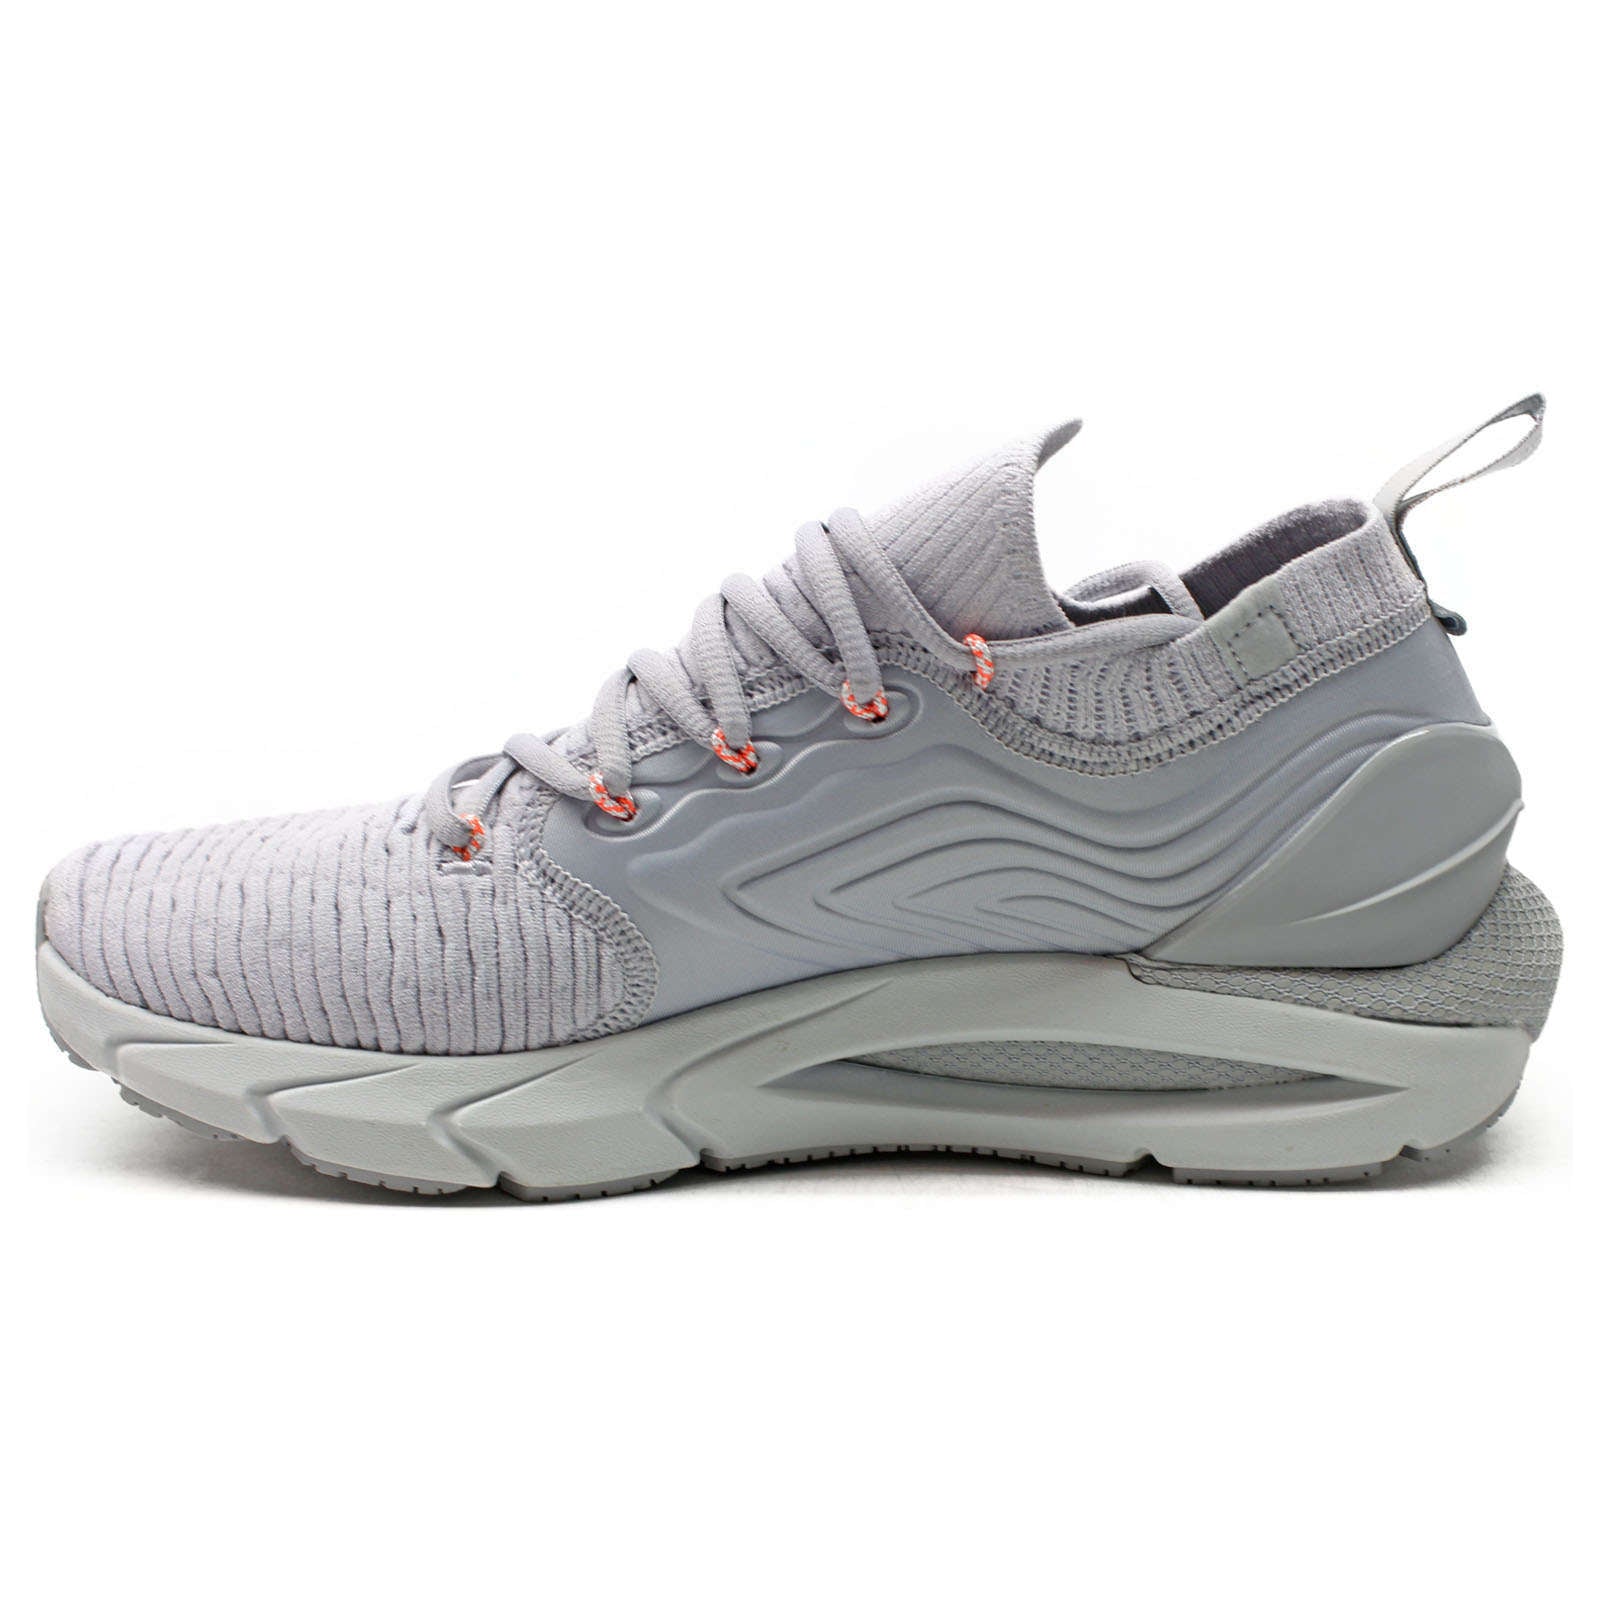 Under Armour HOVR Phantom 2 INKNT Synthetic Textile Men's Low-Top Trainers#color_grey grey